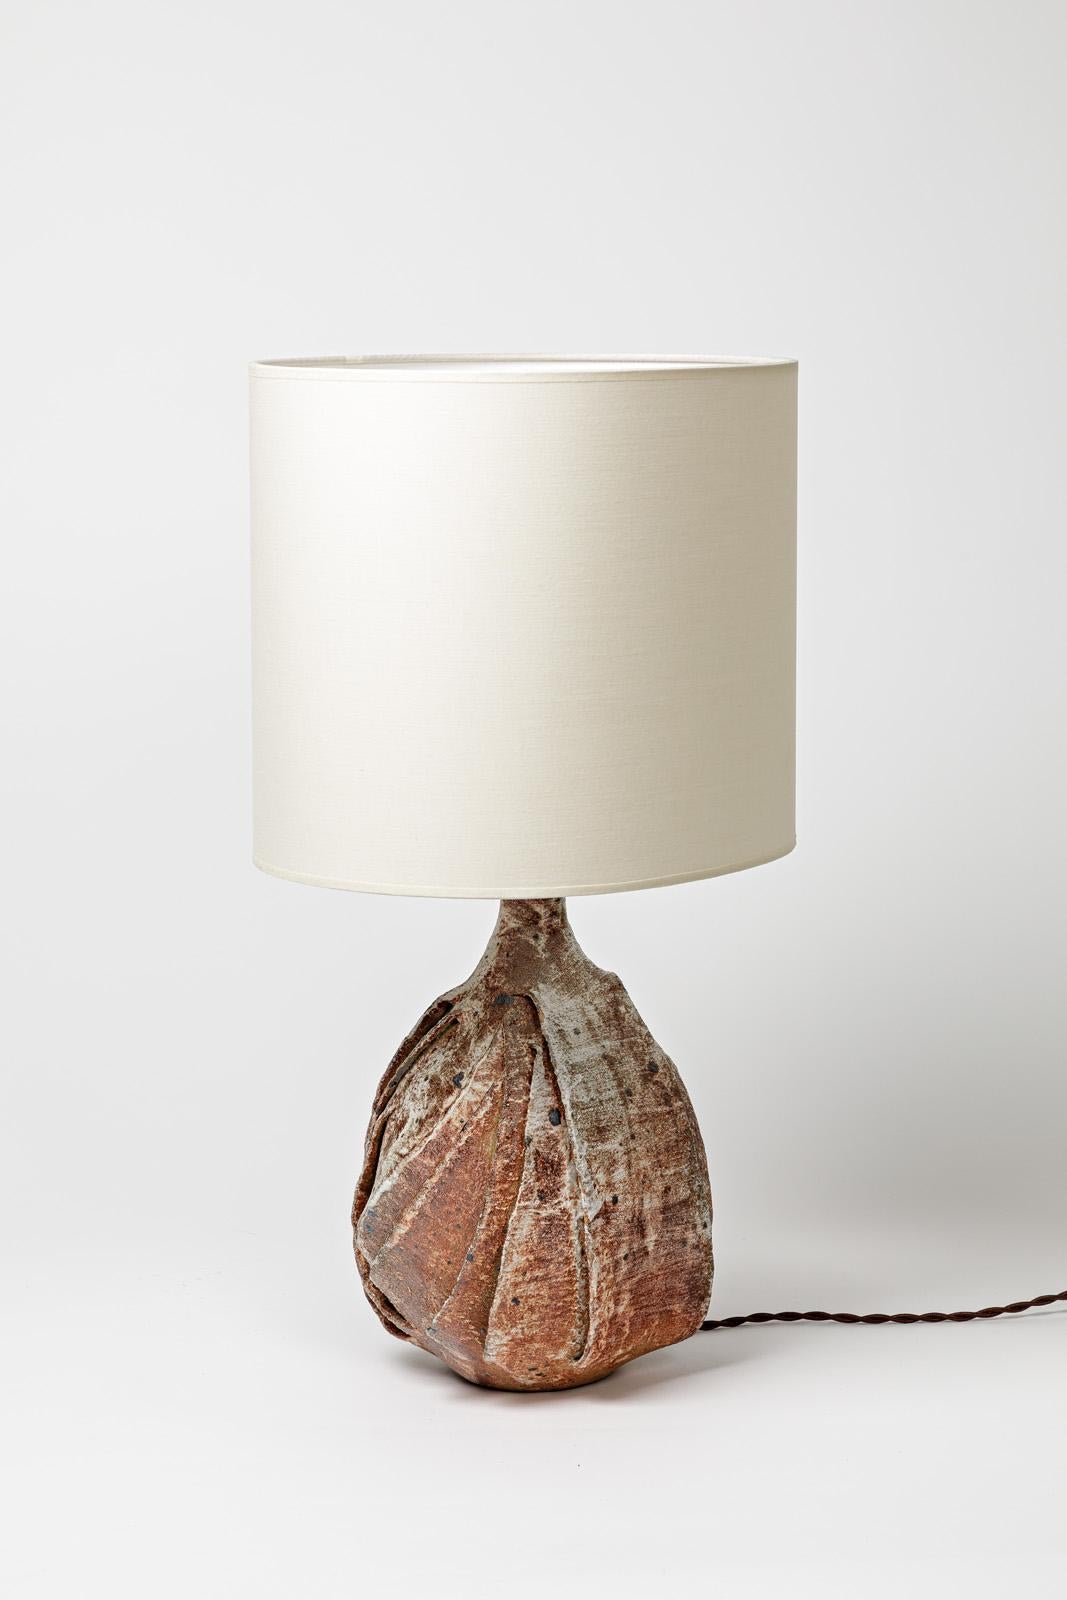 Glazed and Engobed Stoneware Lamp by Bruno H'rdy to La Borne, circa 1970 For Sale 1